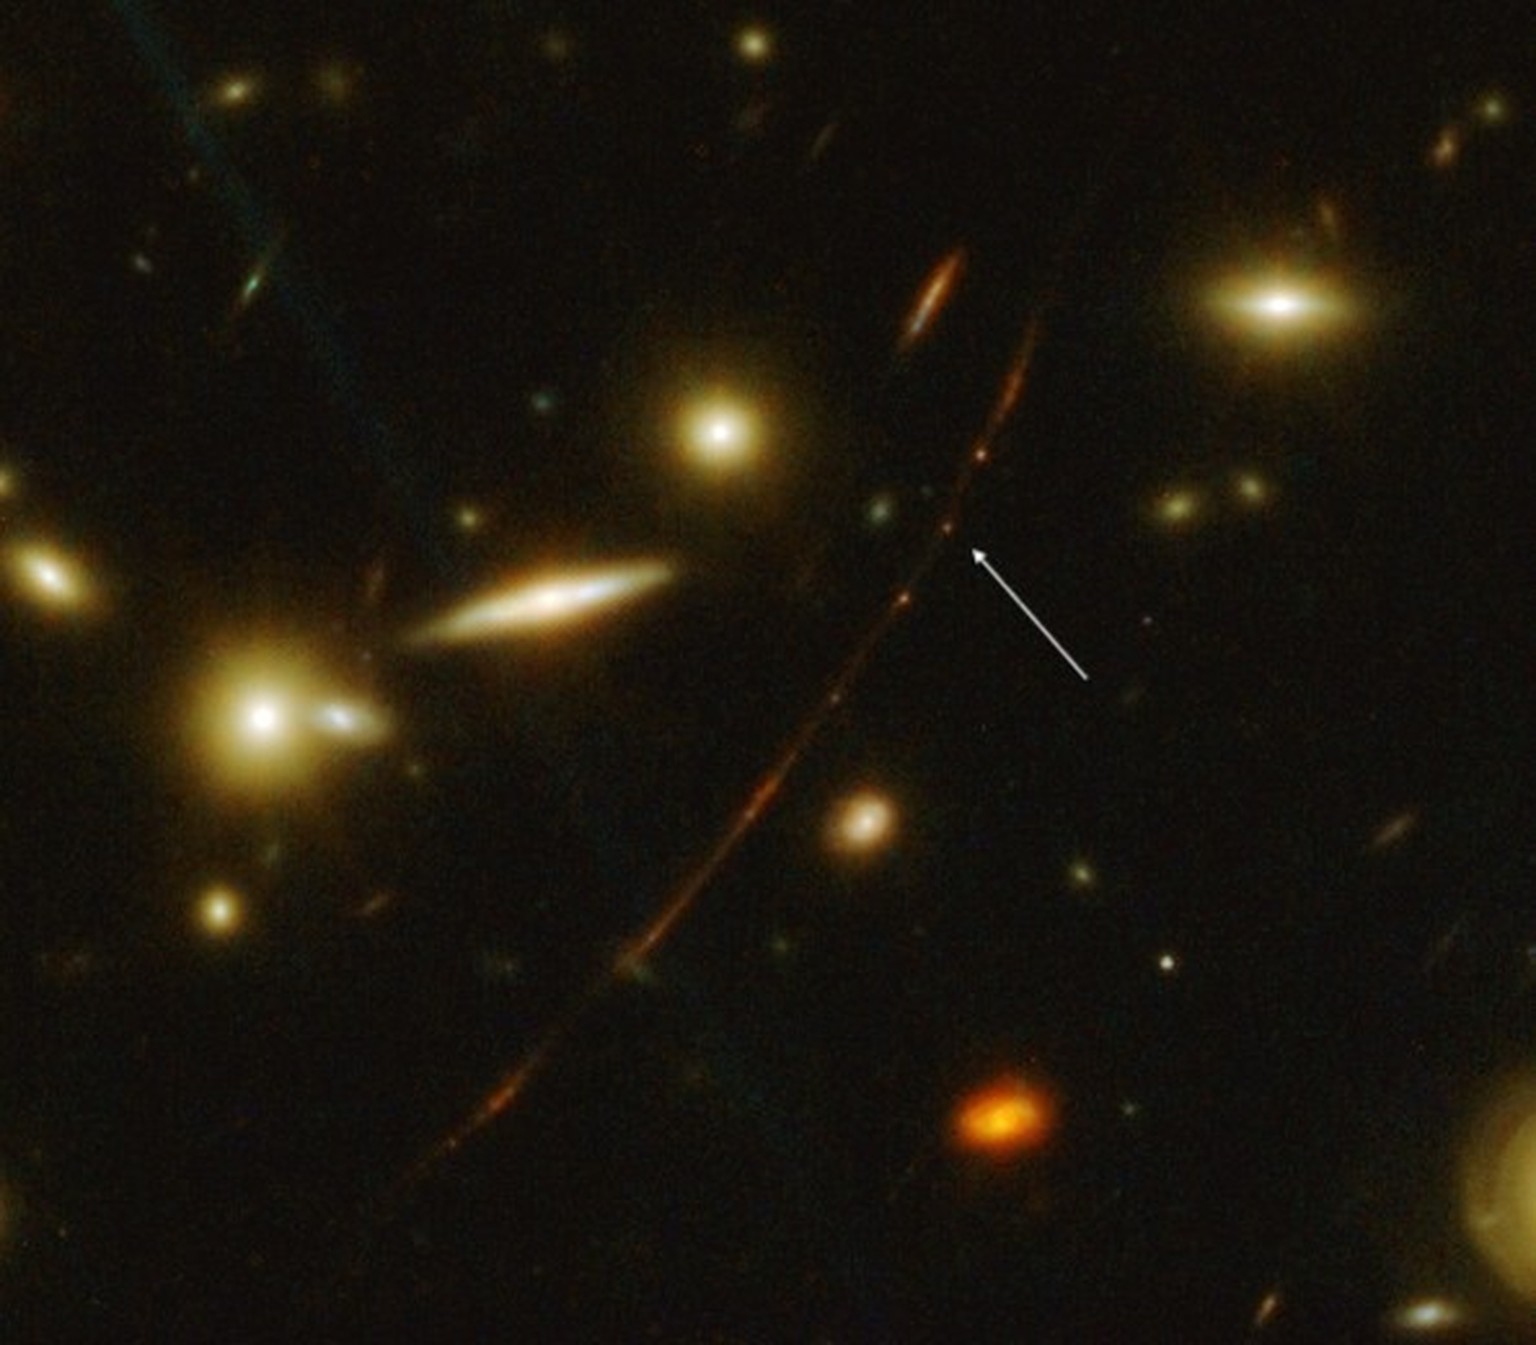 An image taken by the James Webb telescope of the most distant star in the Earendel Universe.